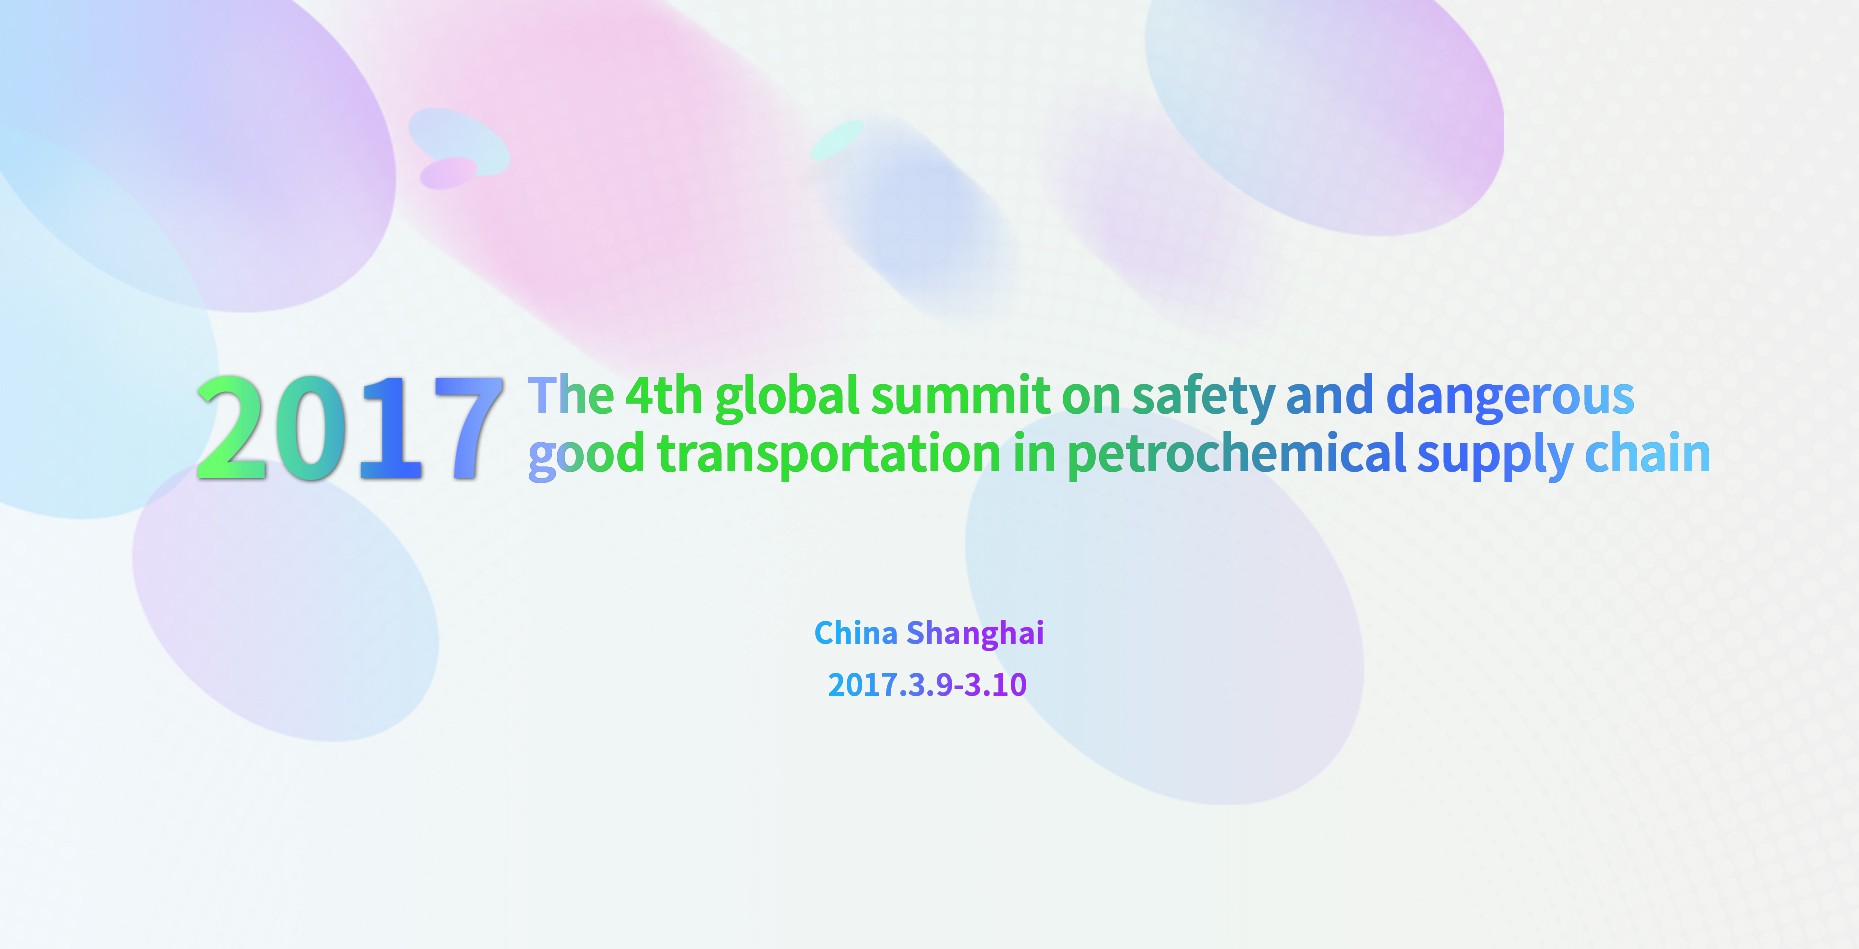 2017 Fourth International Summit on global petrochemical supply chain safety and dangerous goods tra